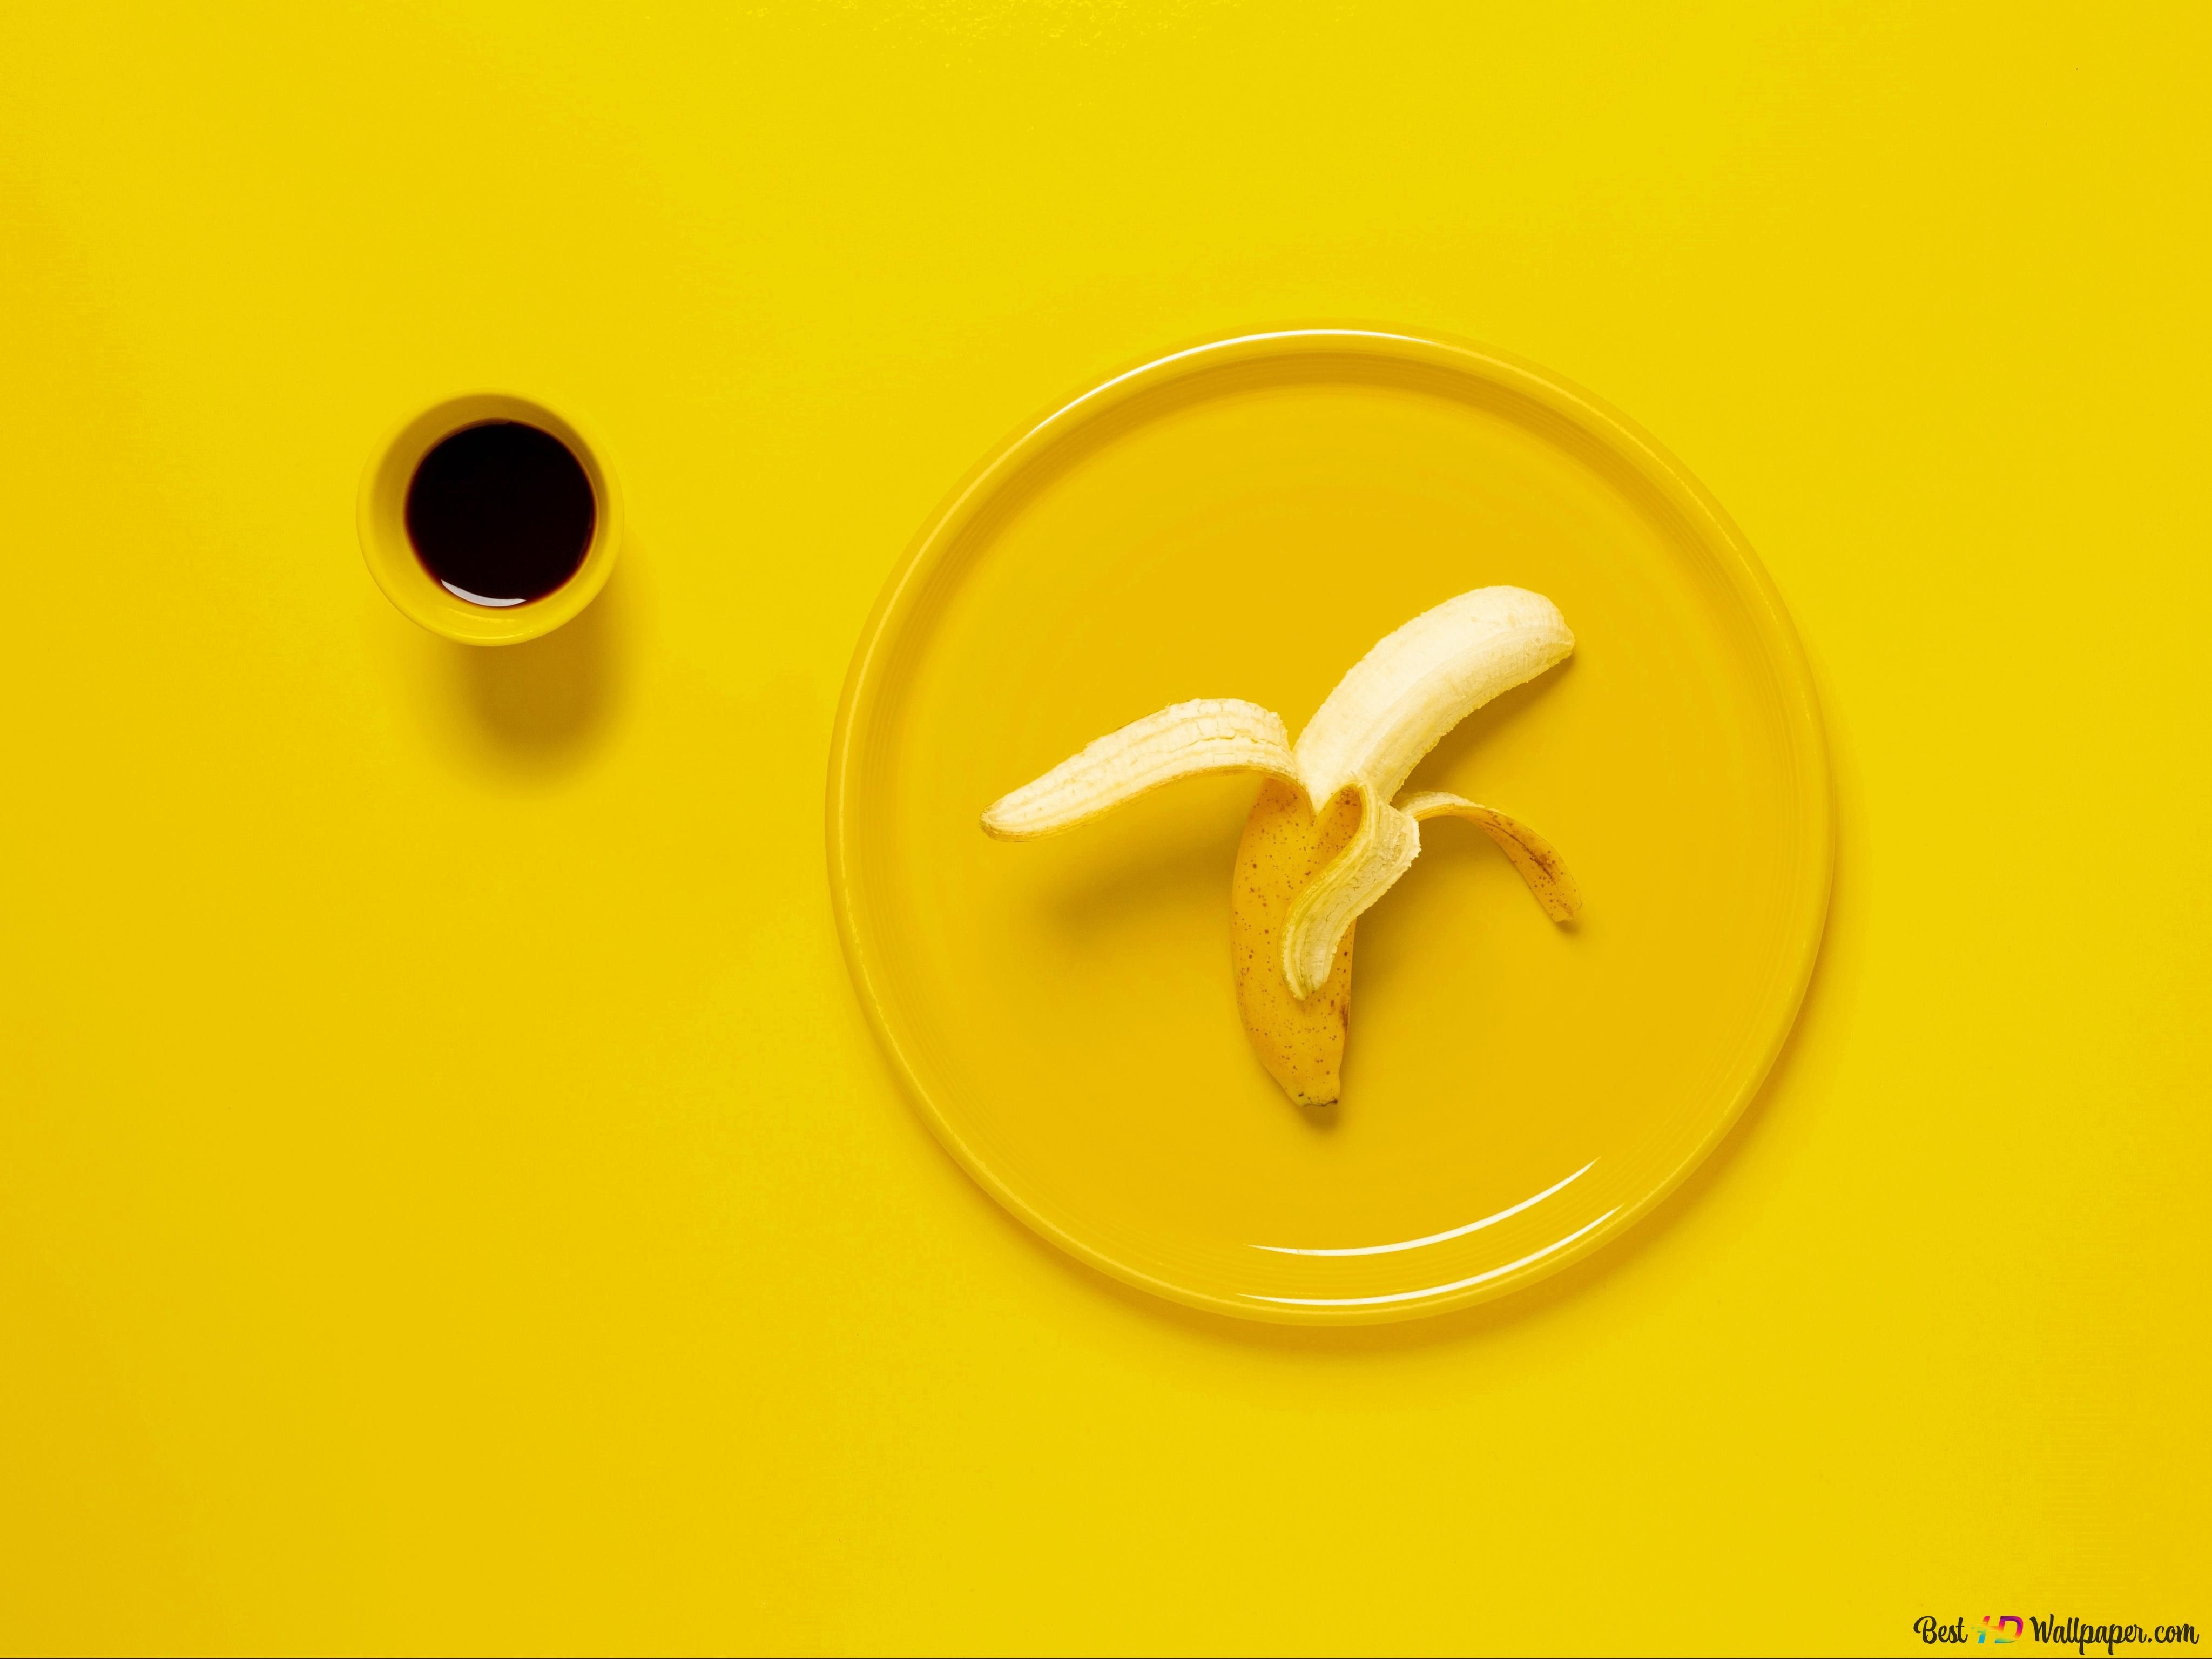 Black Coffee and Banana in yellow background 4K wallpaper download